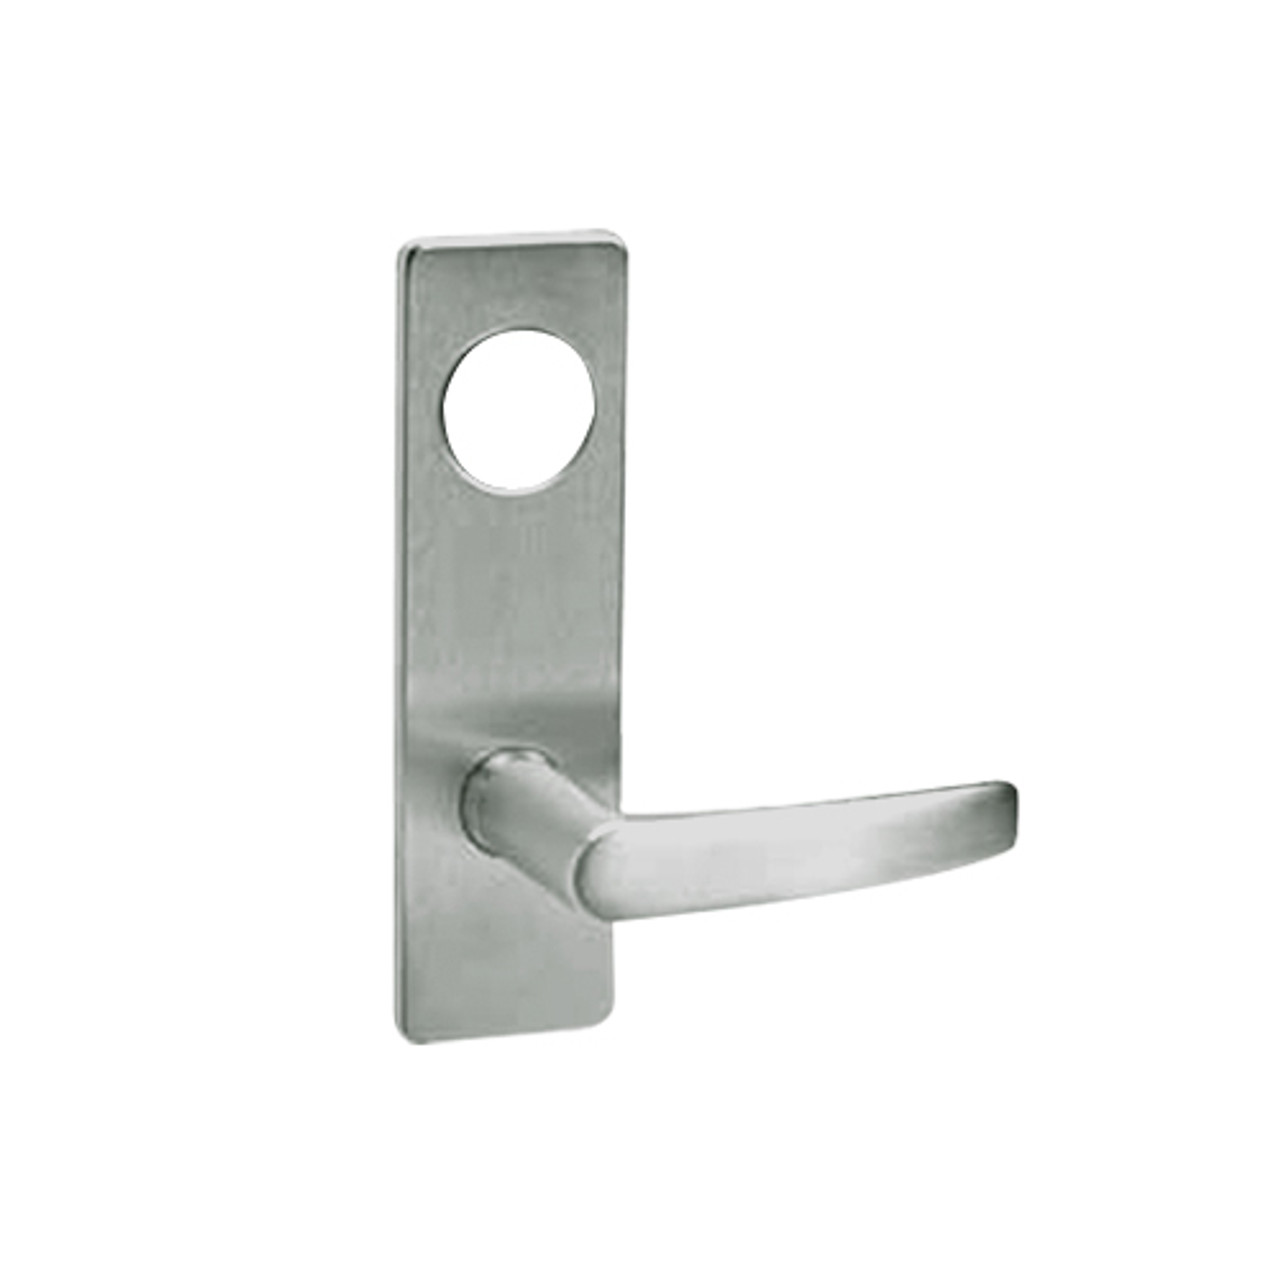 ML2051-ASP-619-CL6 Corbin Russwin ML2000 Series IC 6-Pin Less Core Mortise Office Locksets with Armstrong Lever in Satin Nickel